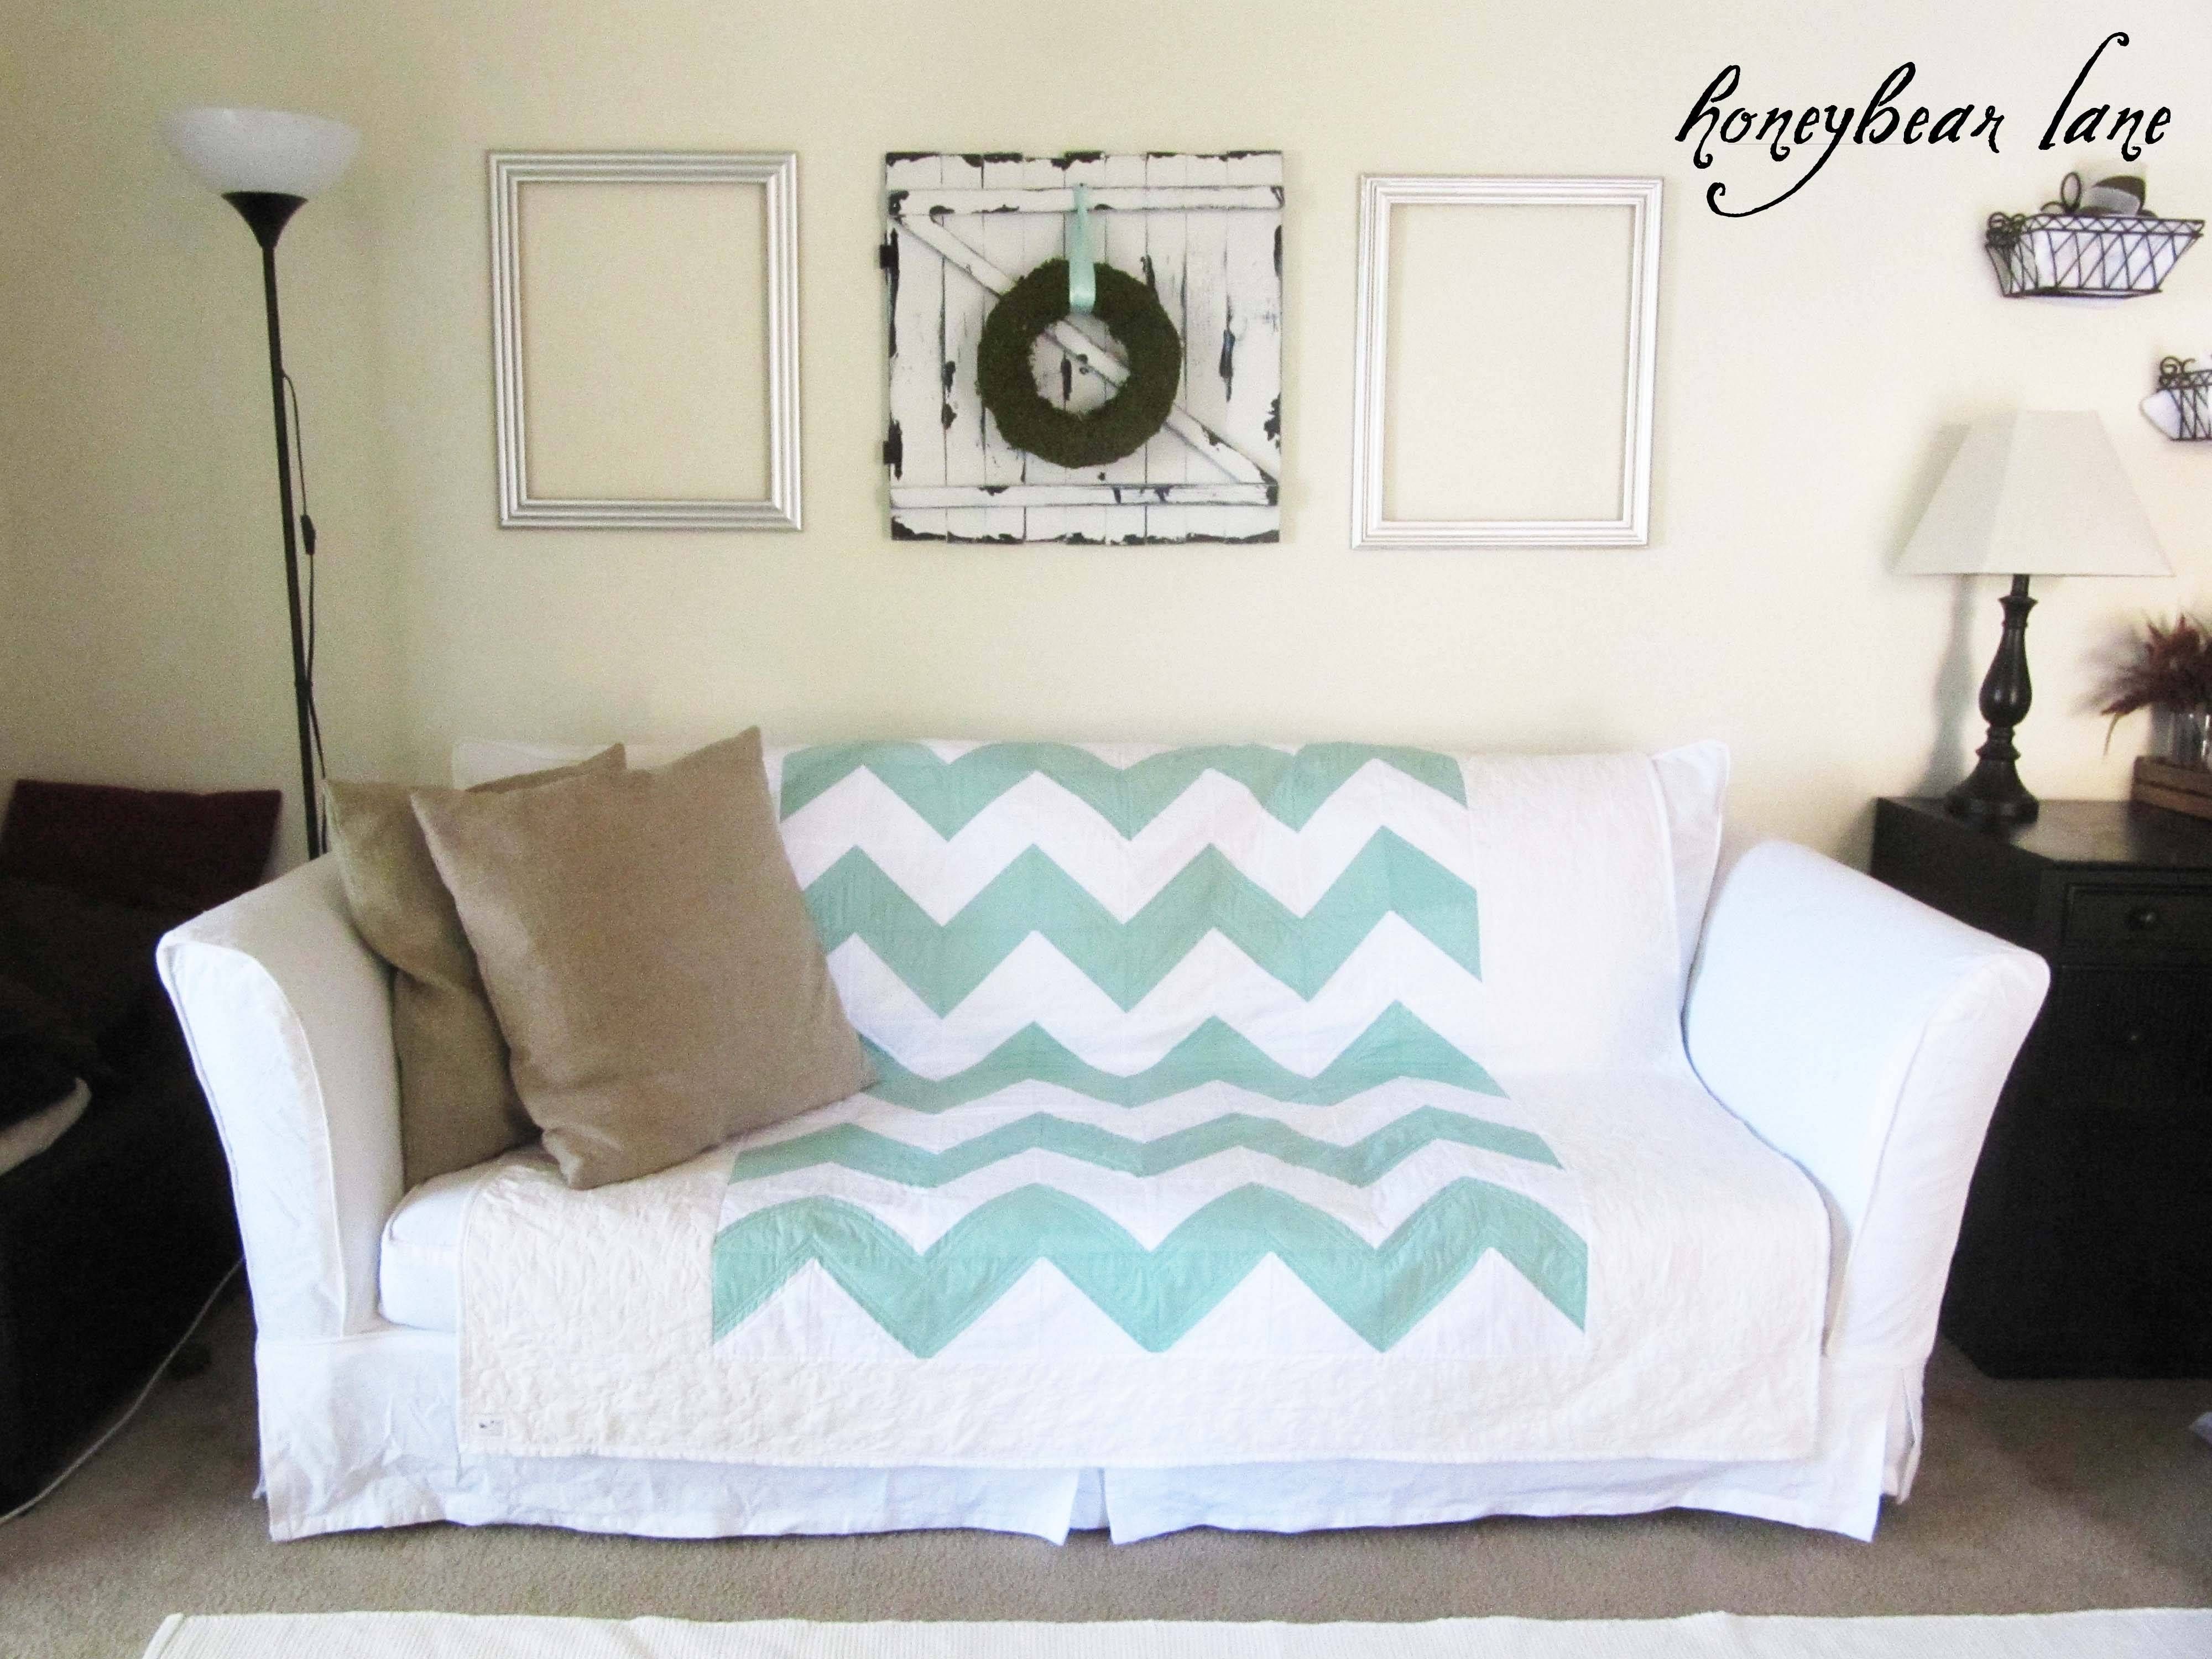 How To Make A Slipcover Part 2: Slipcover Reveal! – Honeybear Lane Within Turquoise Sofa Covers (View 8 of 30)